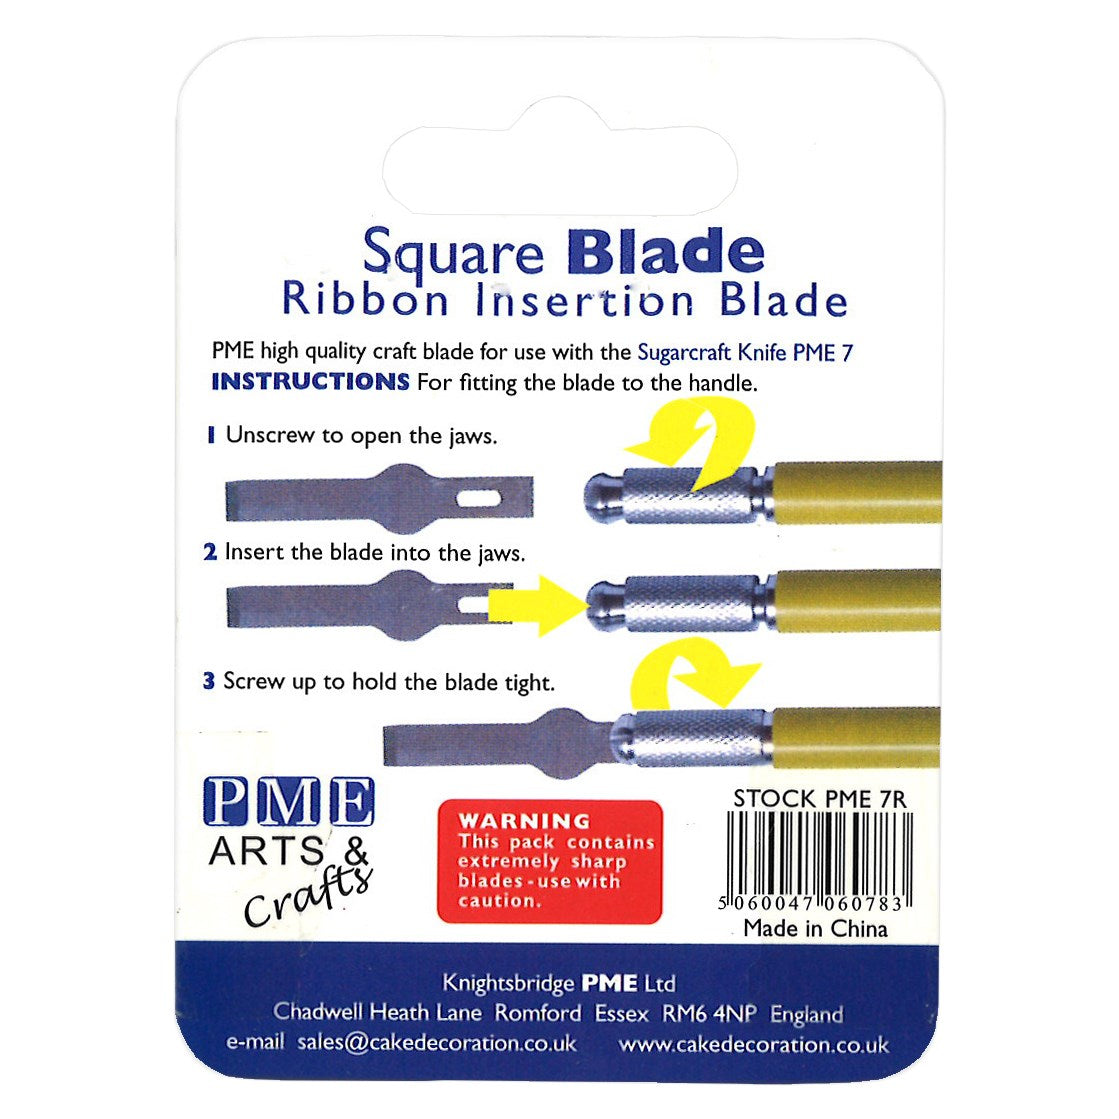 Square Blade 5 pack